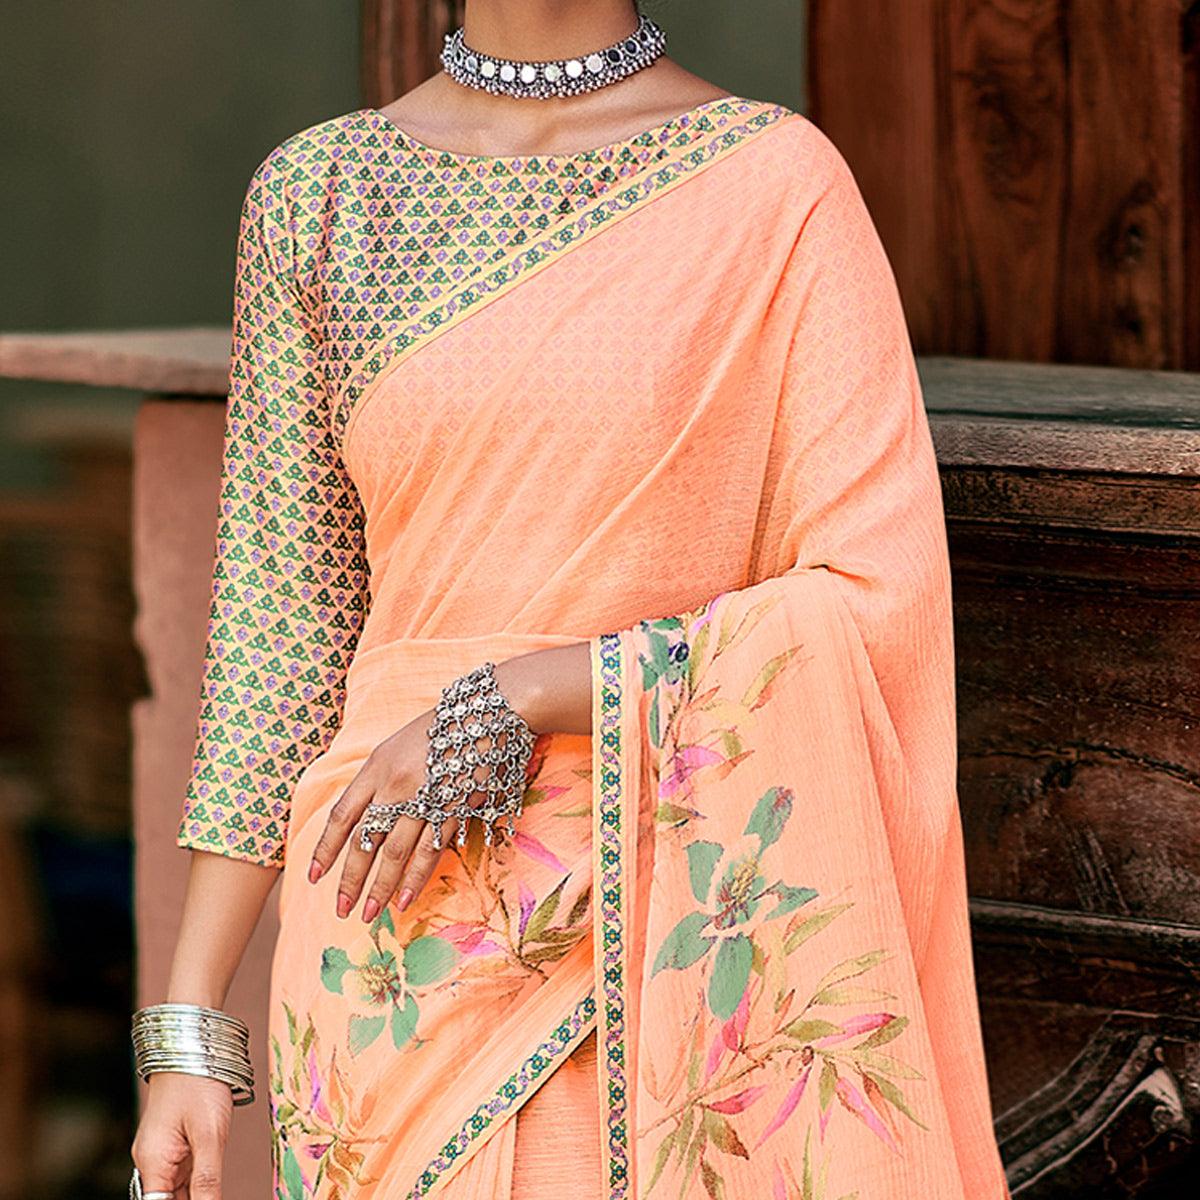 Light Peach Casual Wear Floral Printed Chiffon Saree With Fancy Blouse - Peachmode